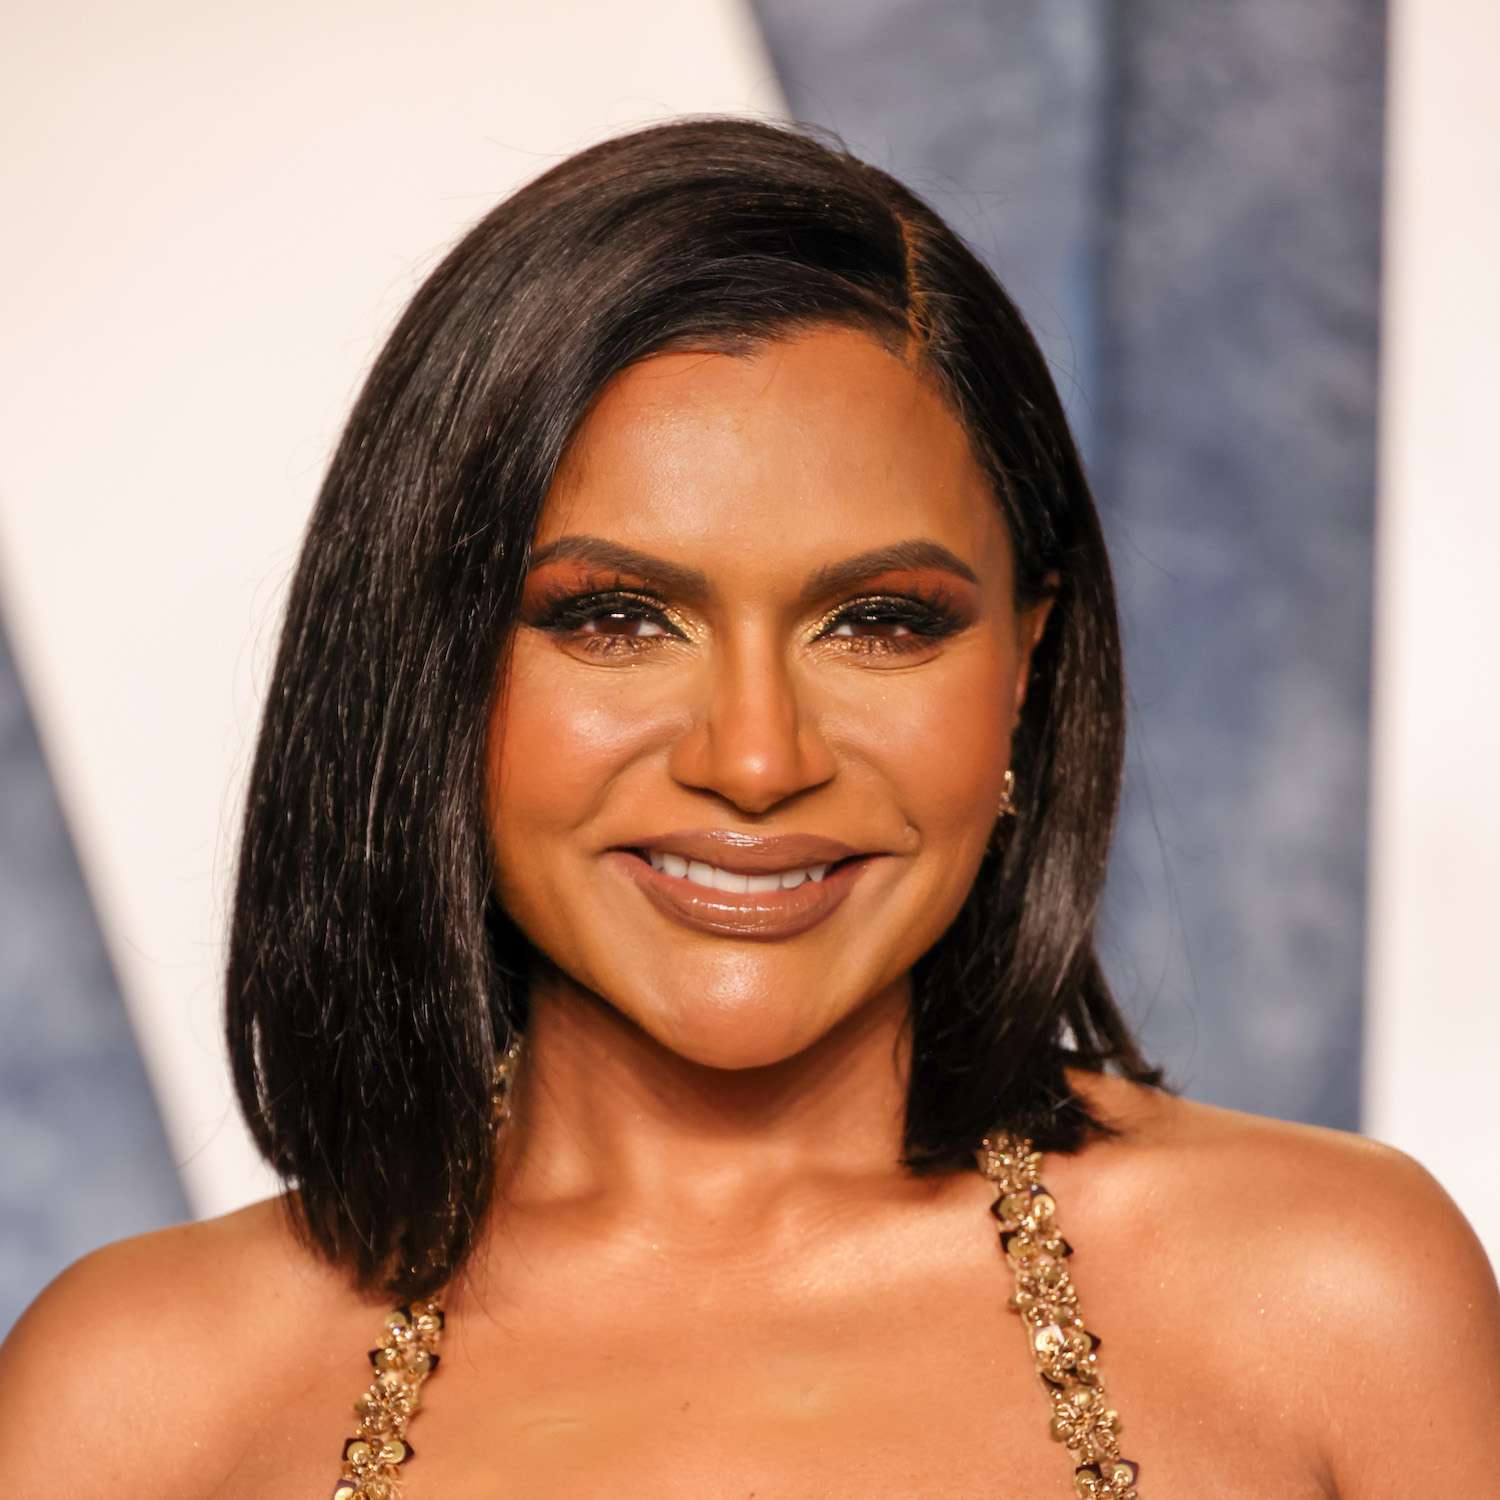 Mindy Kaling wears a sleek, face-framing bob hairstyle with side part